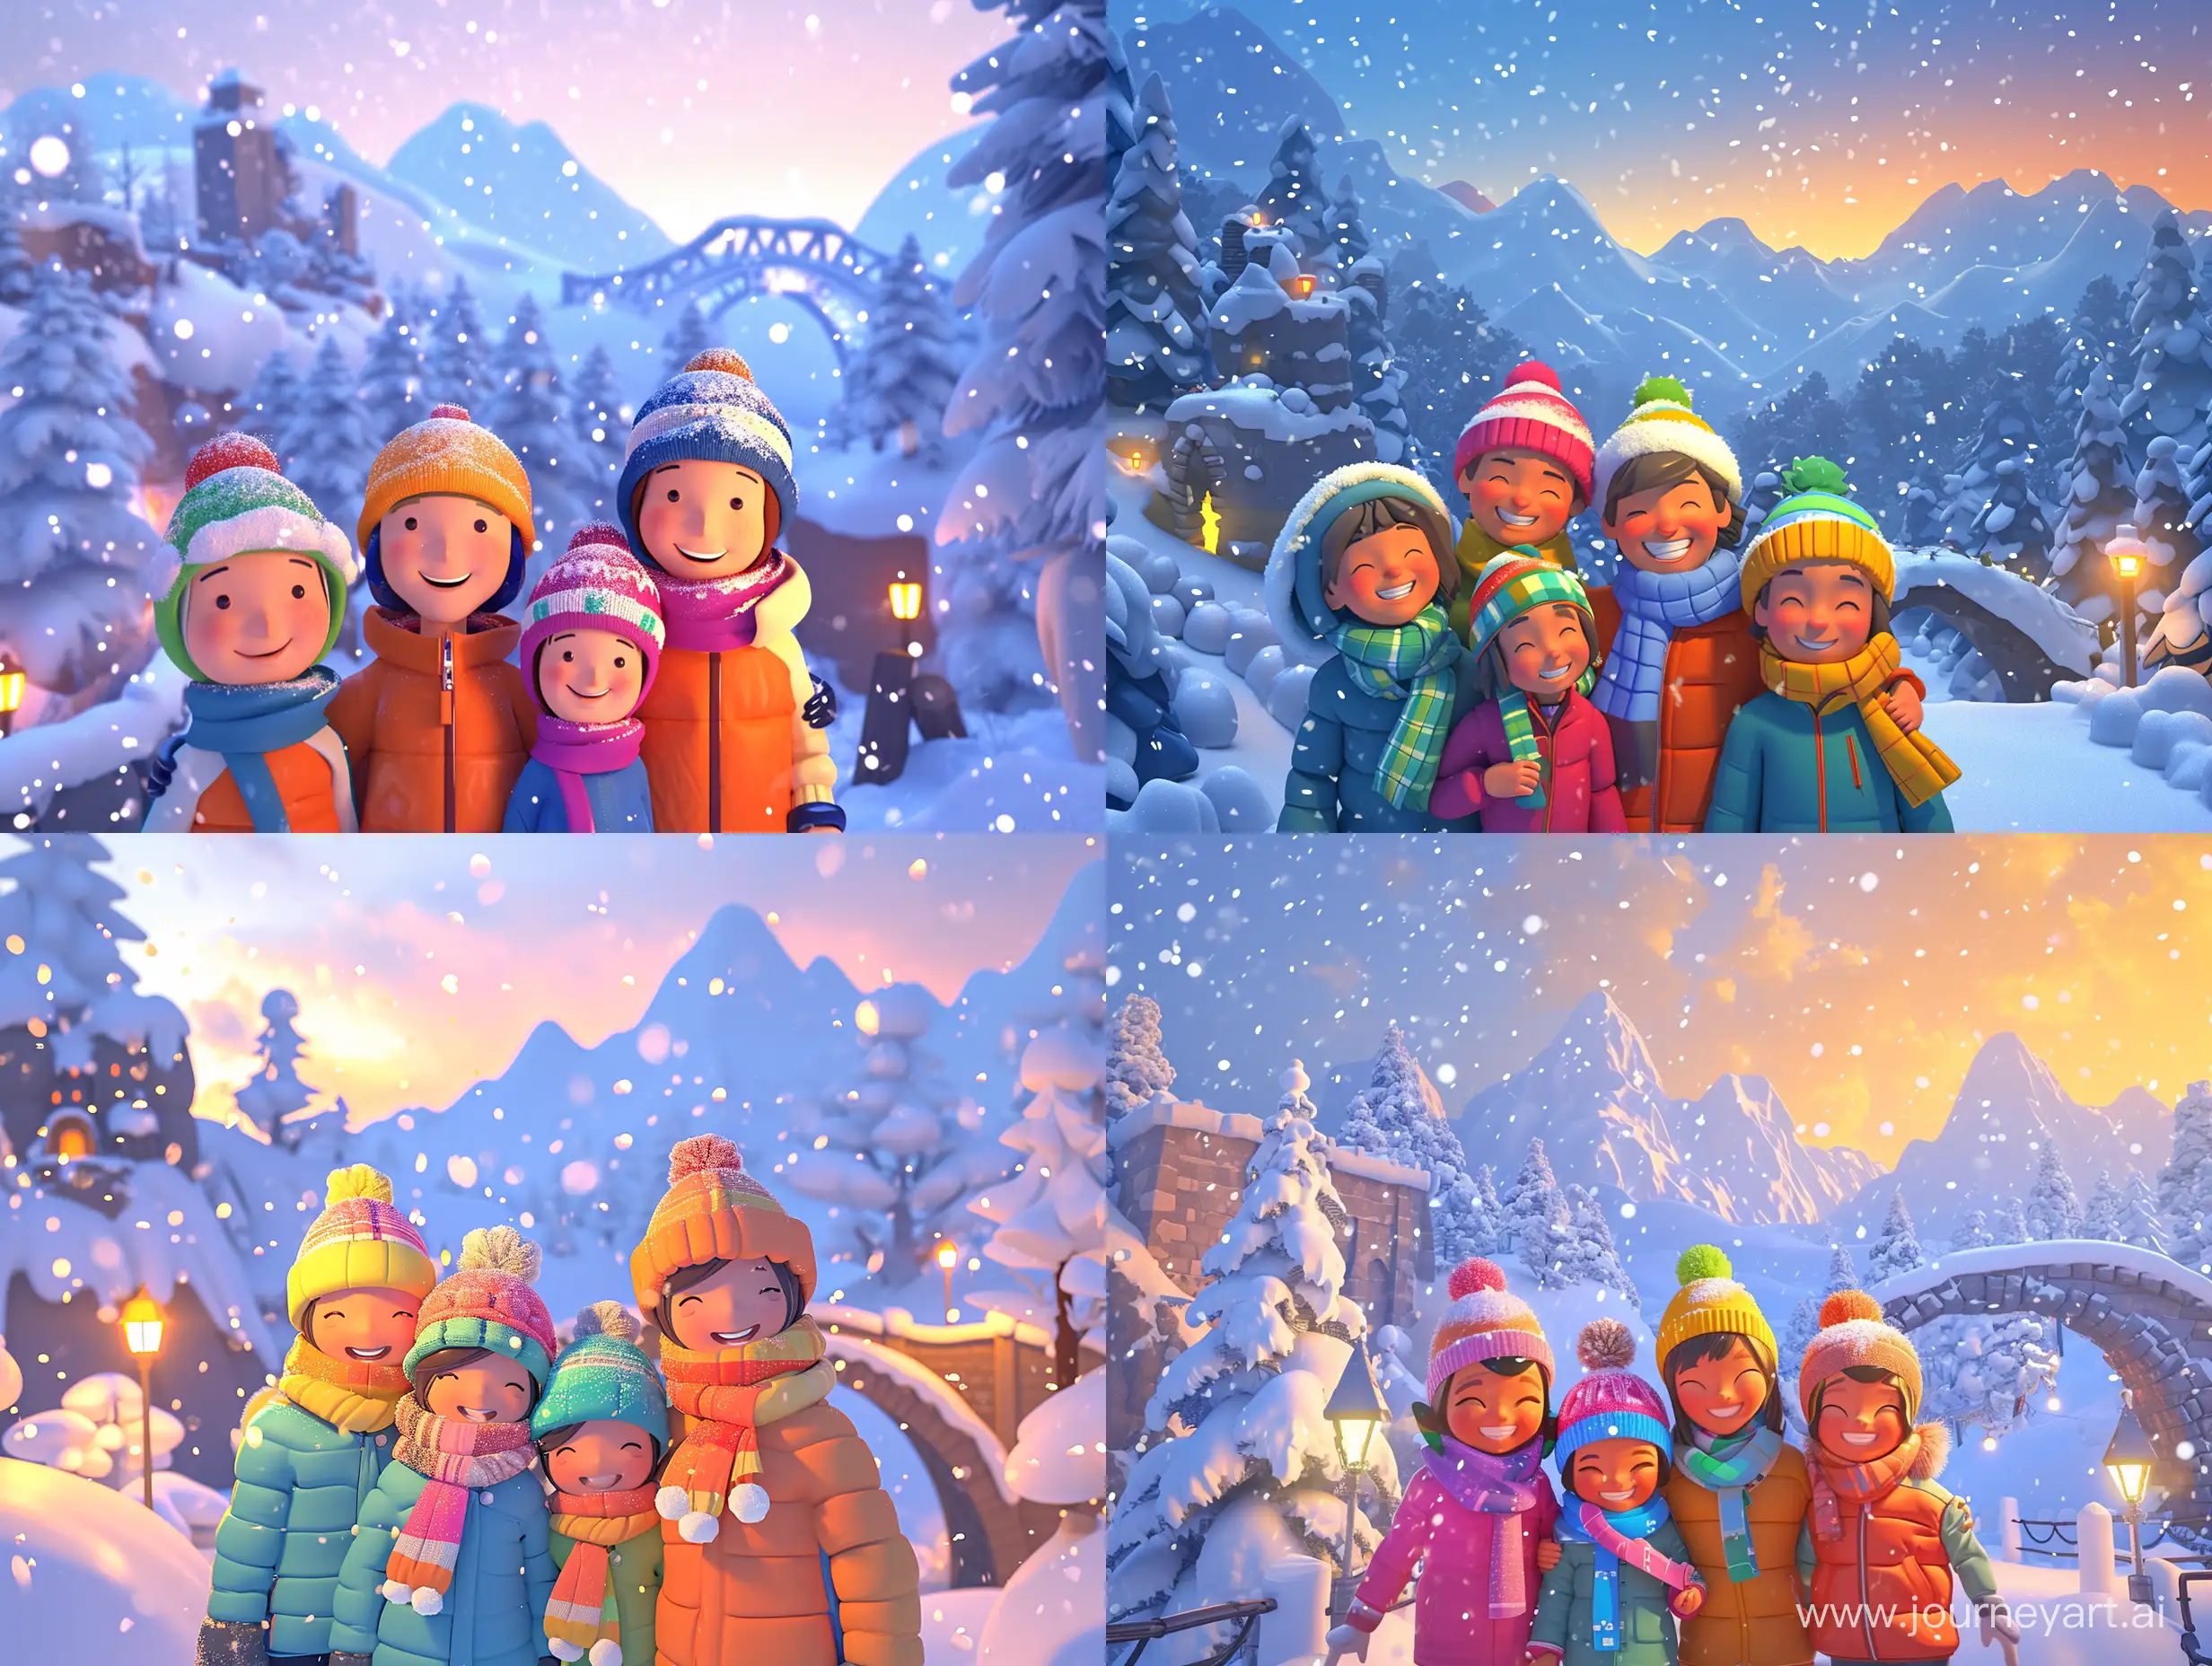 3D Cartoon style of  "A family of four stands against a backdrop of mountains covered in fluffy white snow. They are smiling happily, their brightly colored hats, scarves, and down jackets showing reflections of the orange setting sun. Behind them spreads a magical snowy forest of snow-curved trees. To the right rises the icy arch of a bridge spanning the gorge. To the left, the snow-covered ruins of a castle on a cliff could be seen. Soft flakes of snow fall slowly around the family. The lights of a distant village twinkle in the distance. A breathtaking winter landscape with unusual details."peaks can be seen in the distance.